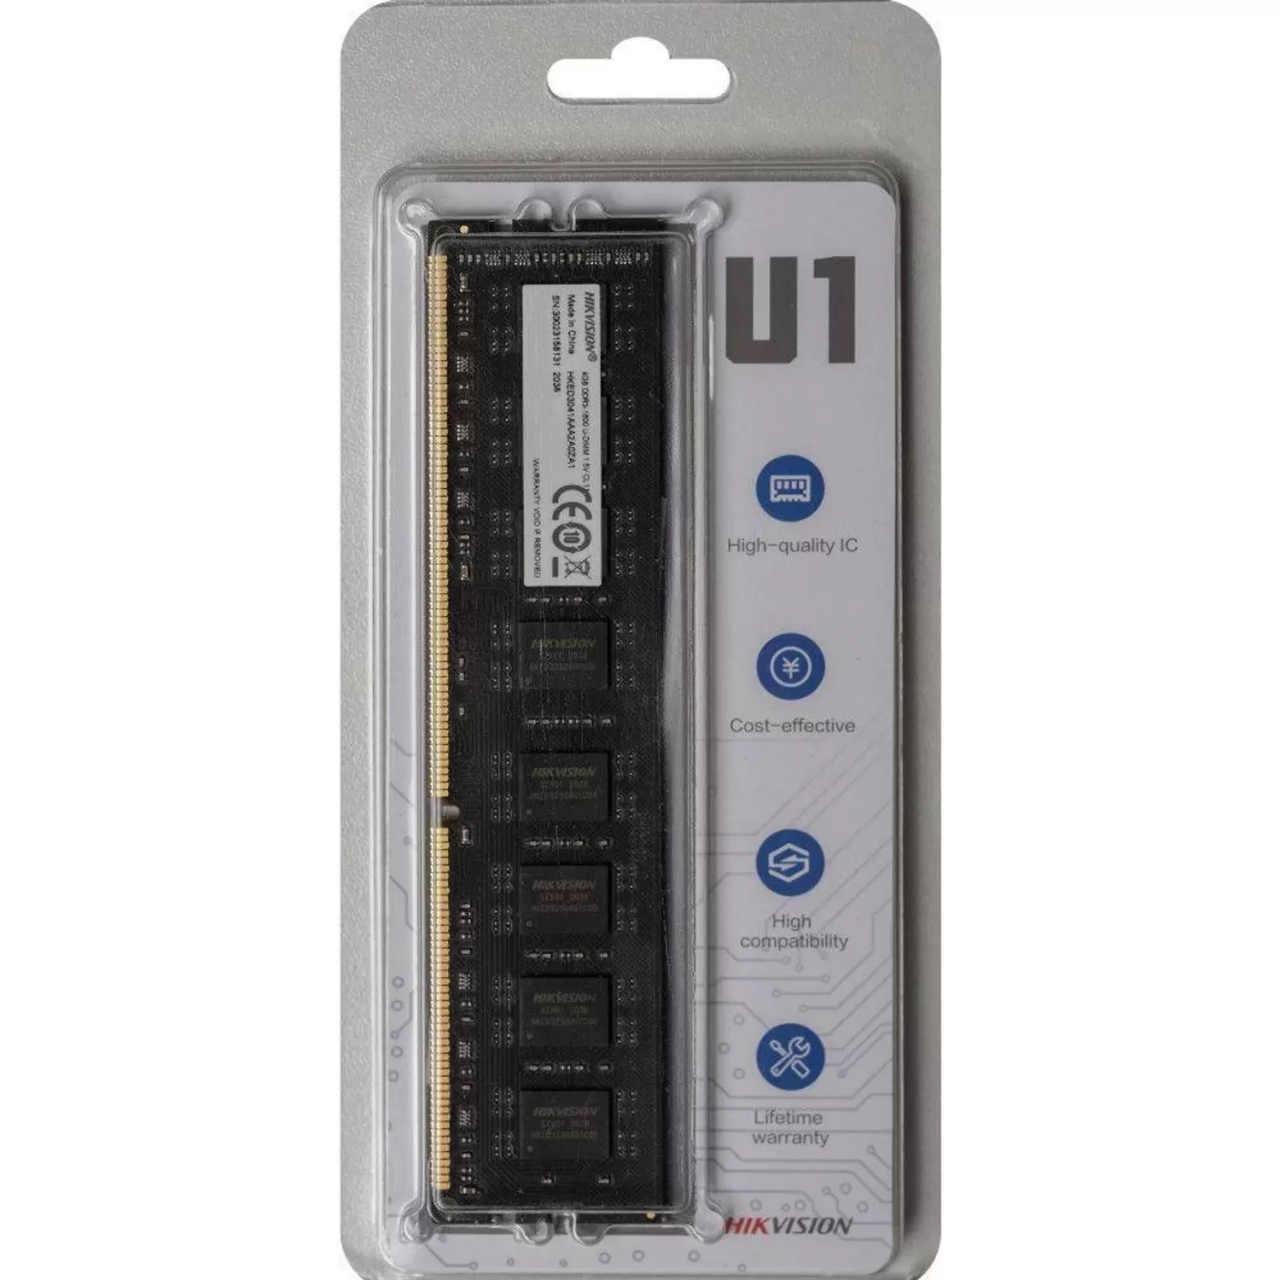 HIKVISION 4GB DDR3 1600MHZ PC RAM U1 HKED3041AAA2A0ZA1